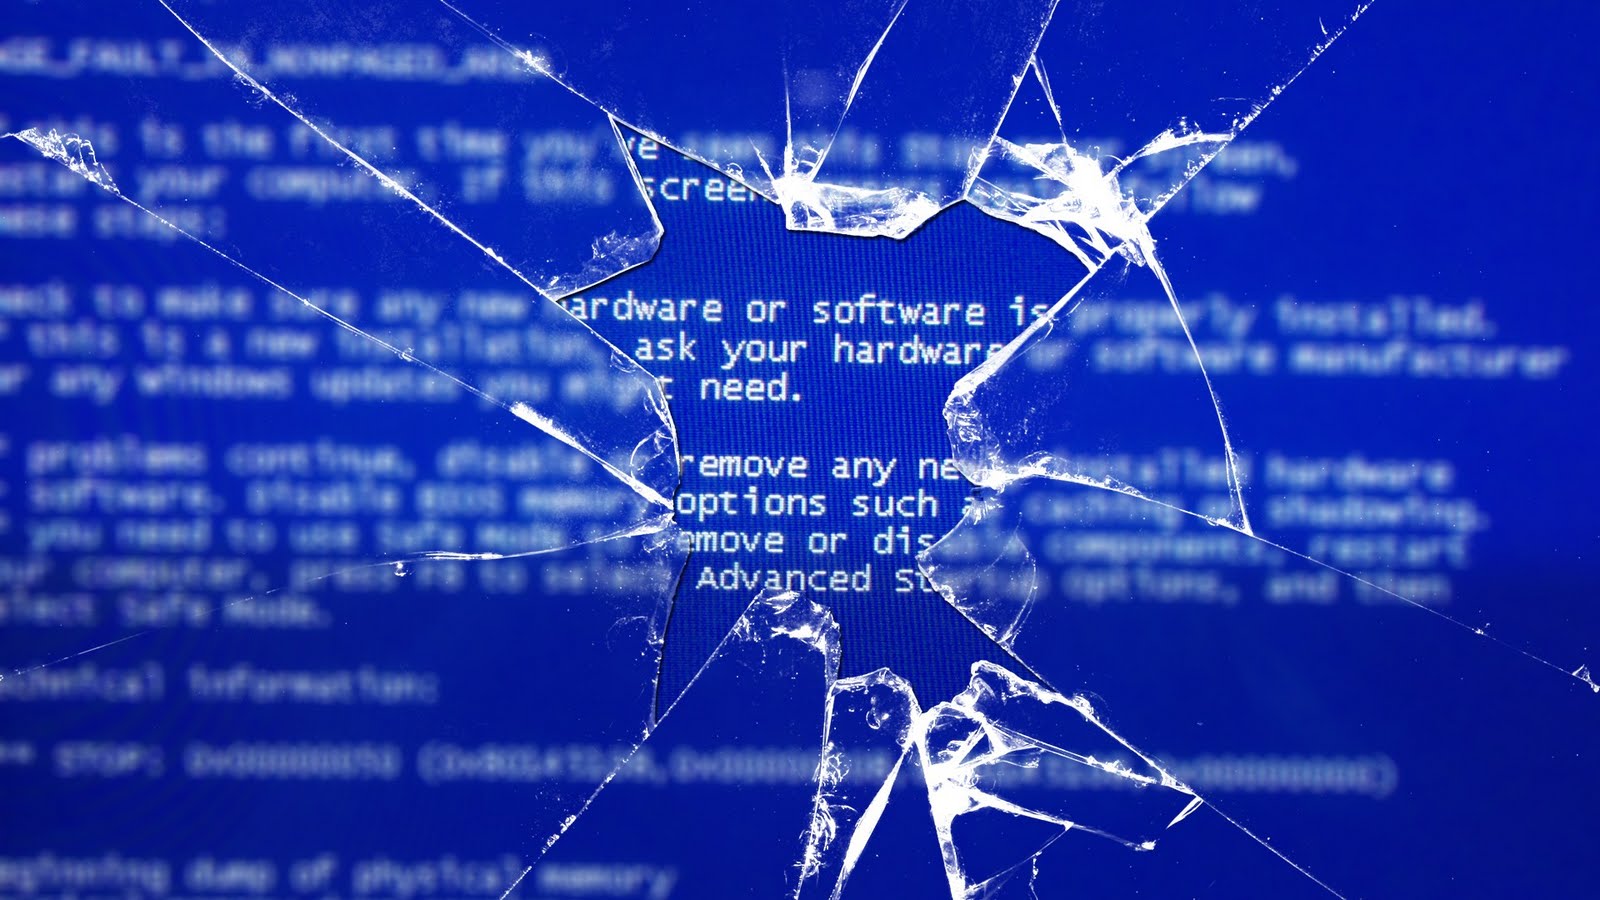 Wallpapers Funny Epic Windows Bsod Broken Glass Hd Os 1600x900 ...